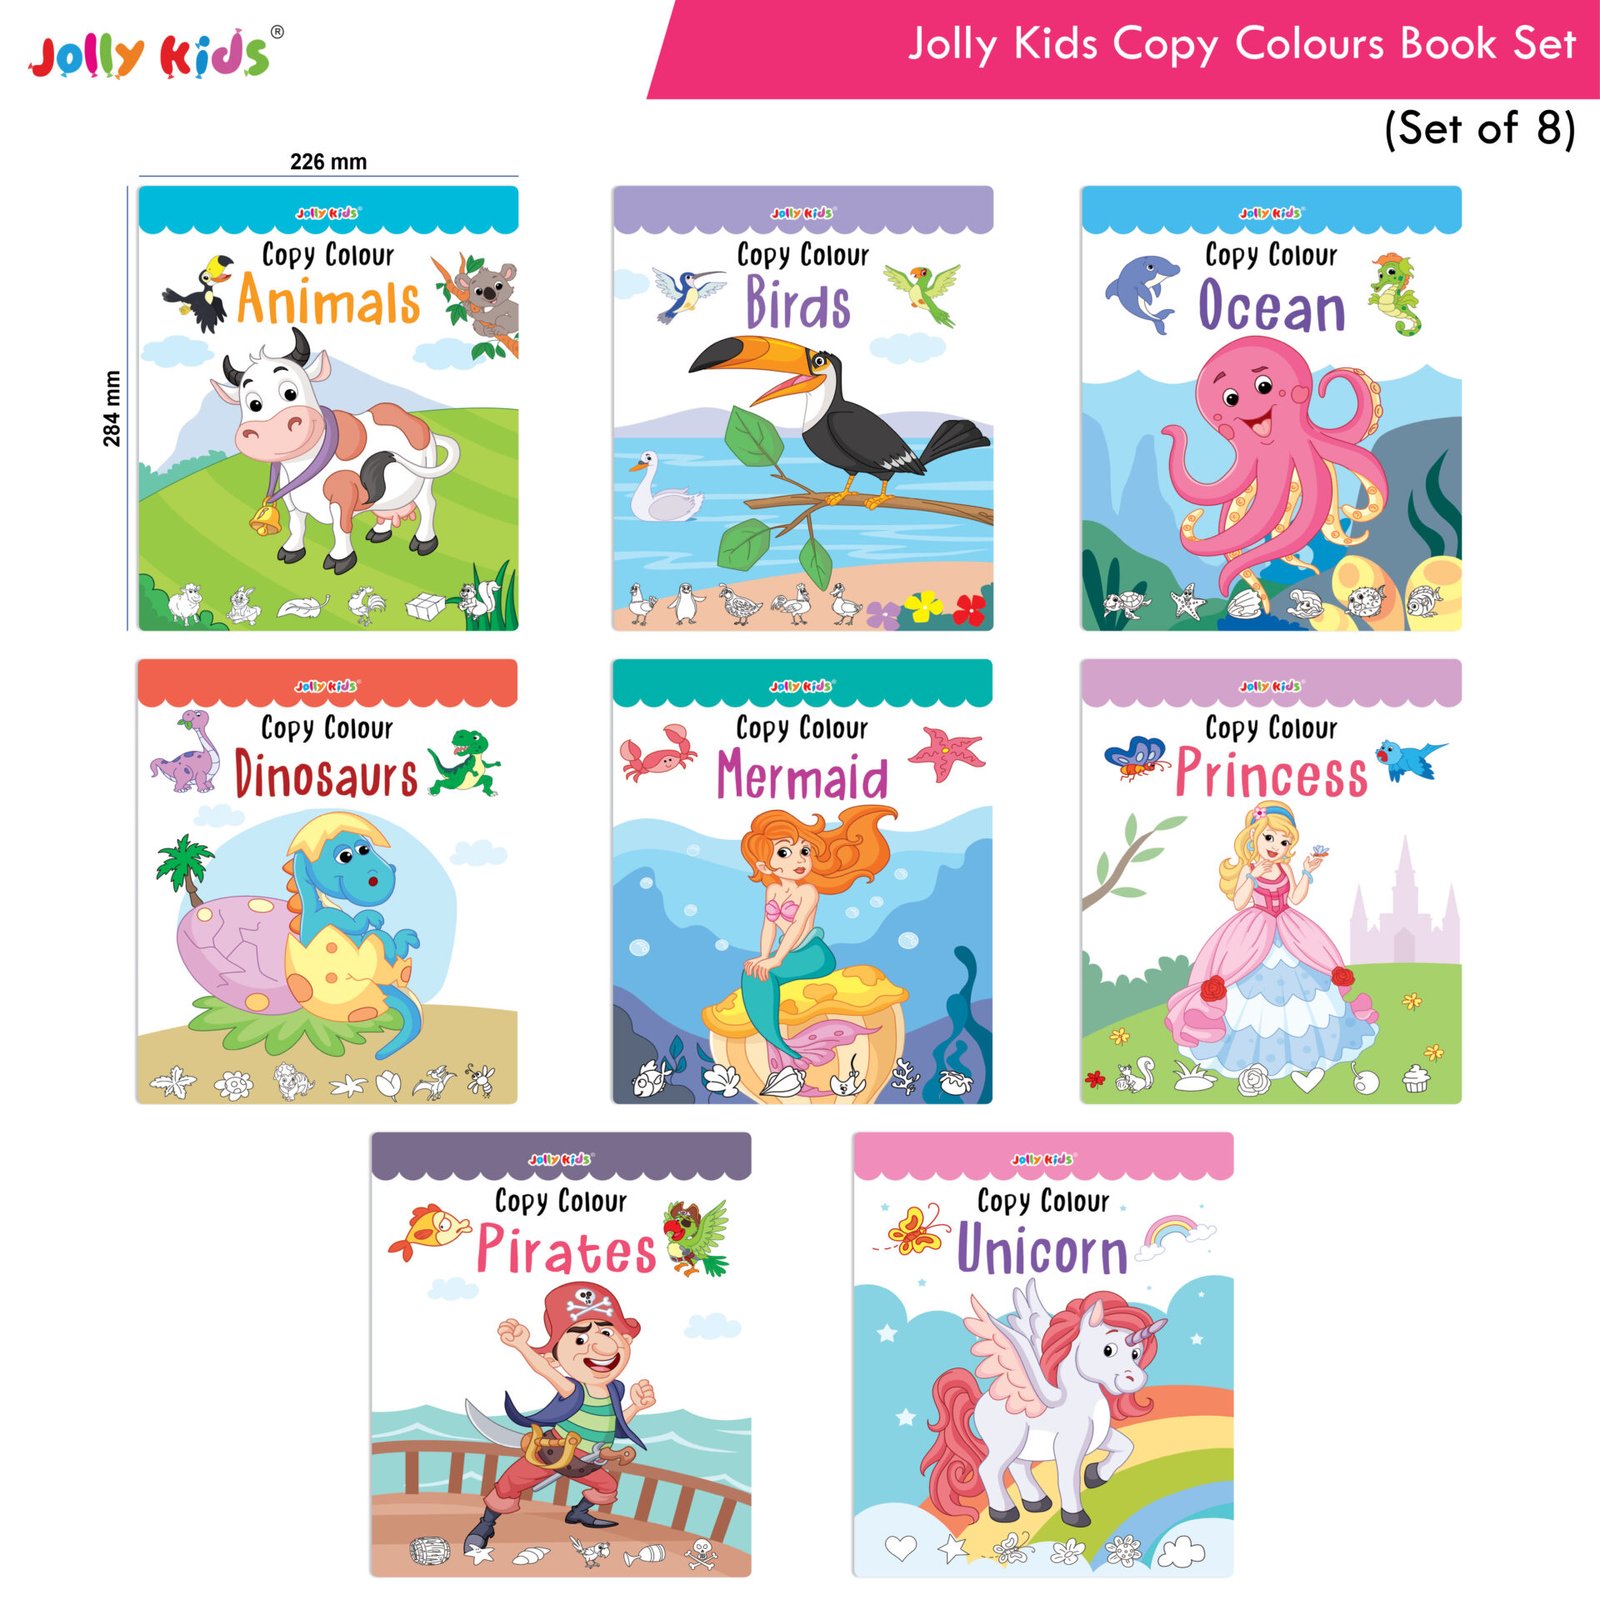 Jolly Kids Colouring for Fun Books B, Set of 4